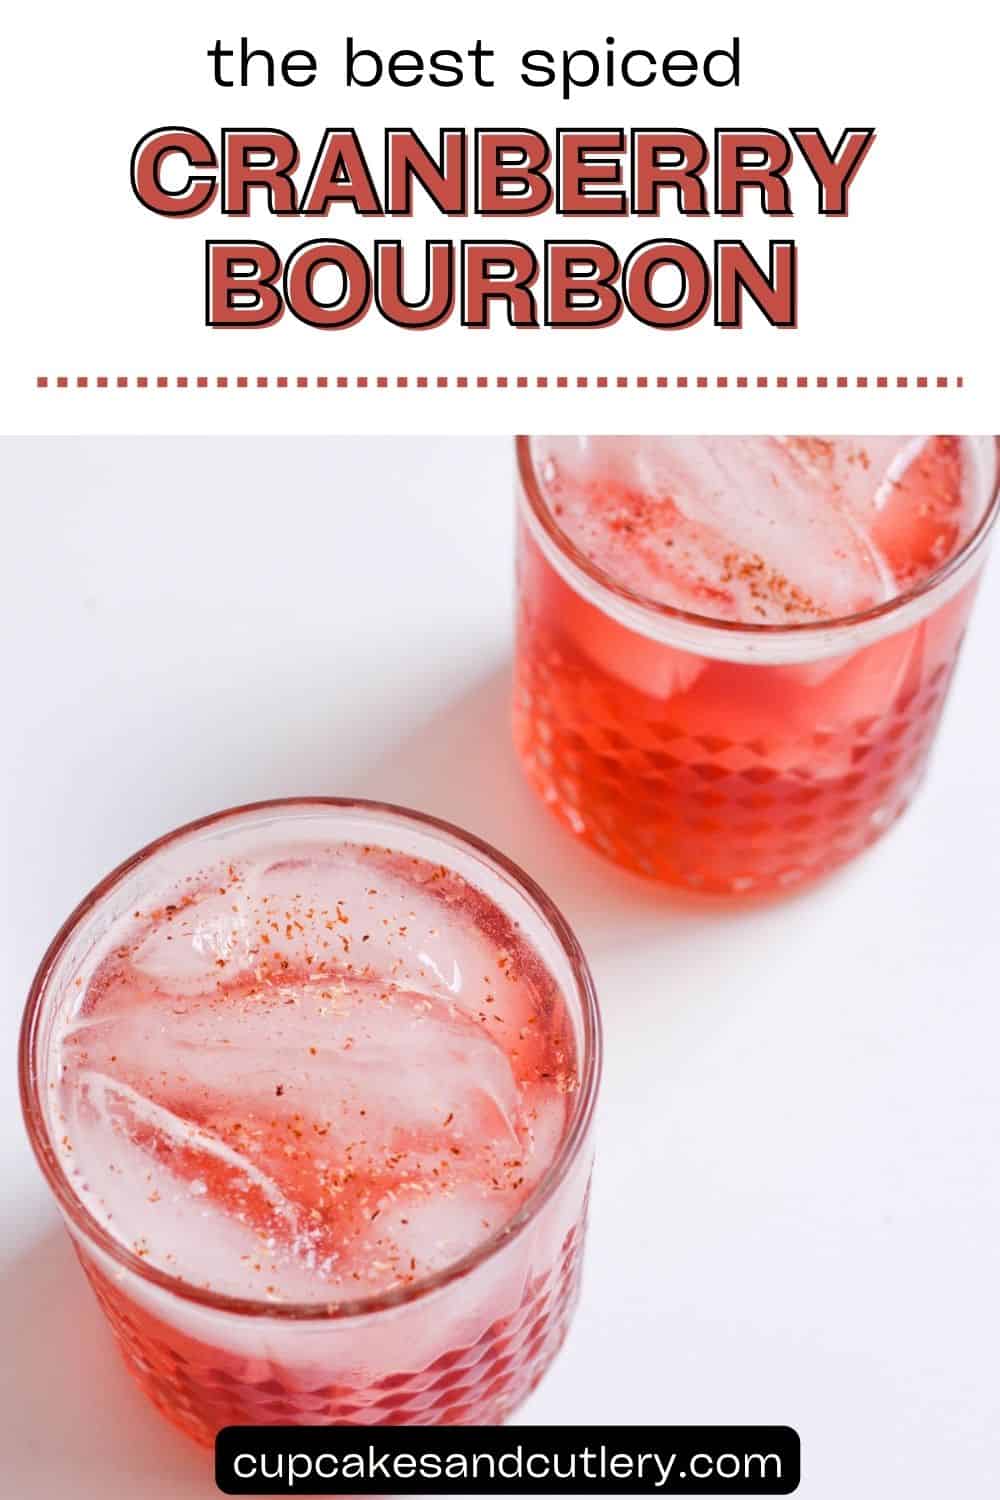 Text: The best spiced cranberry bourbon cocktail with two glasses holding a cranberry bourbon cocktail on a table.